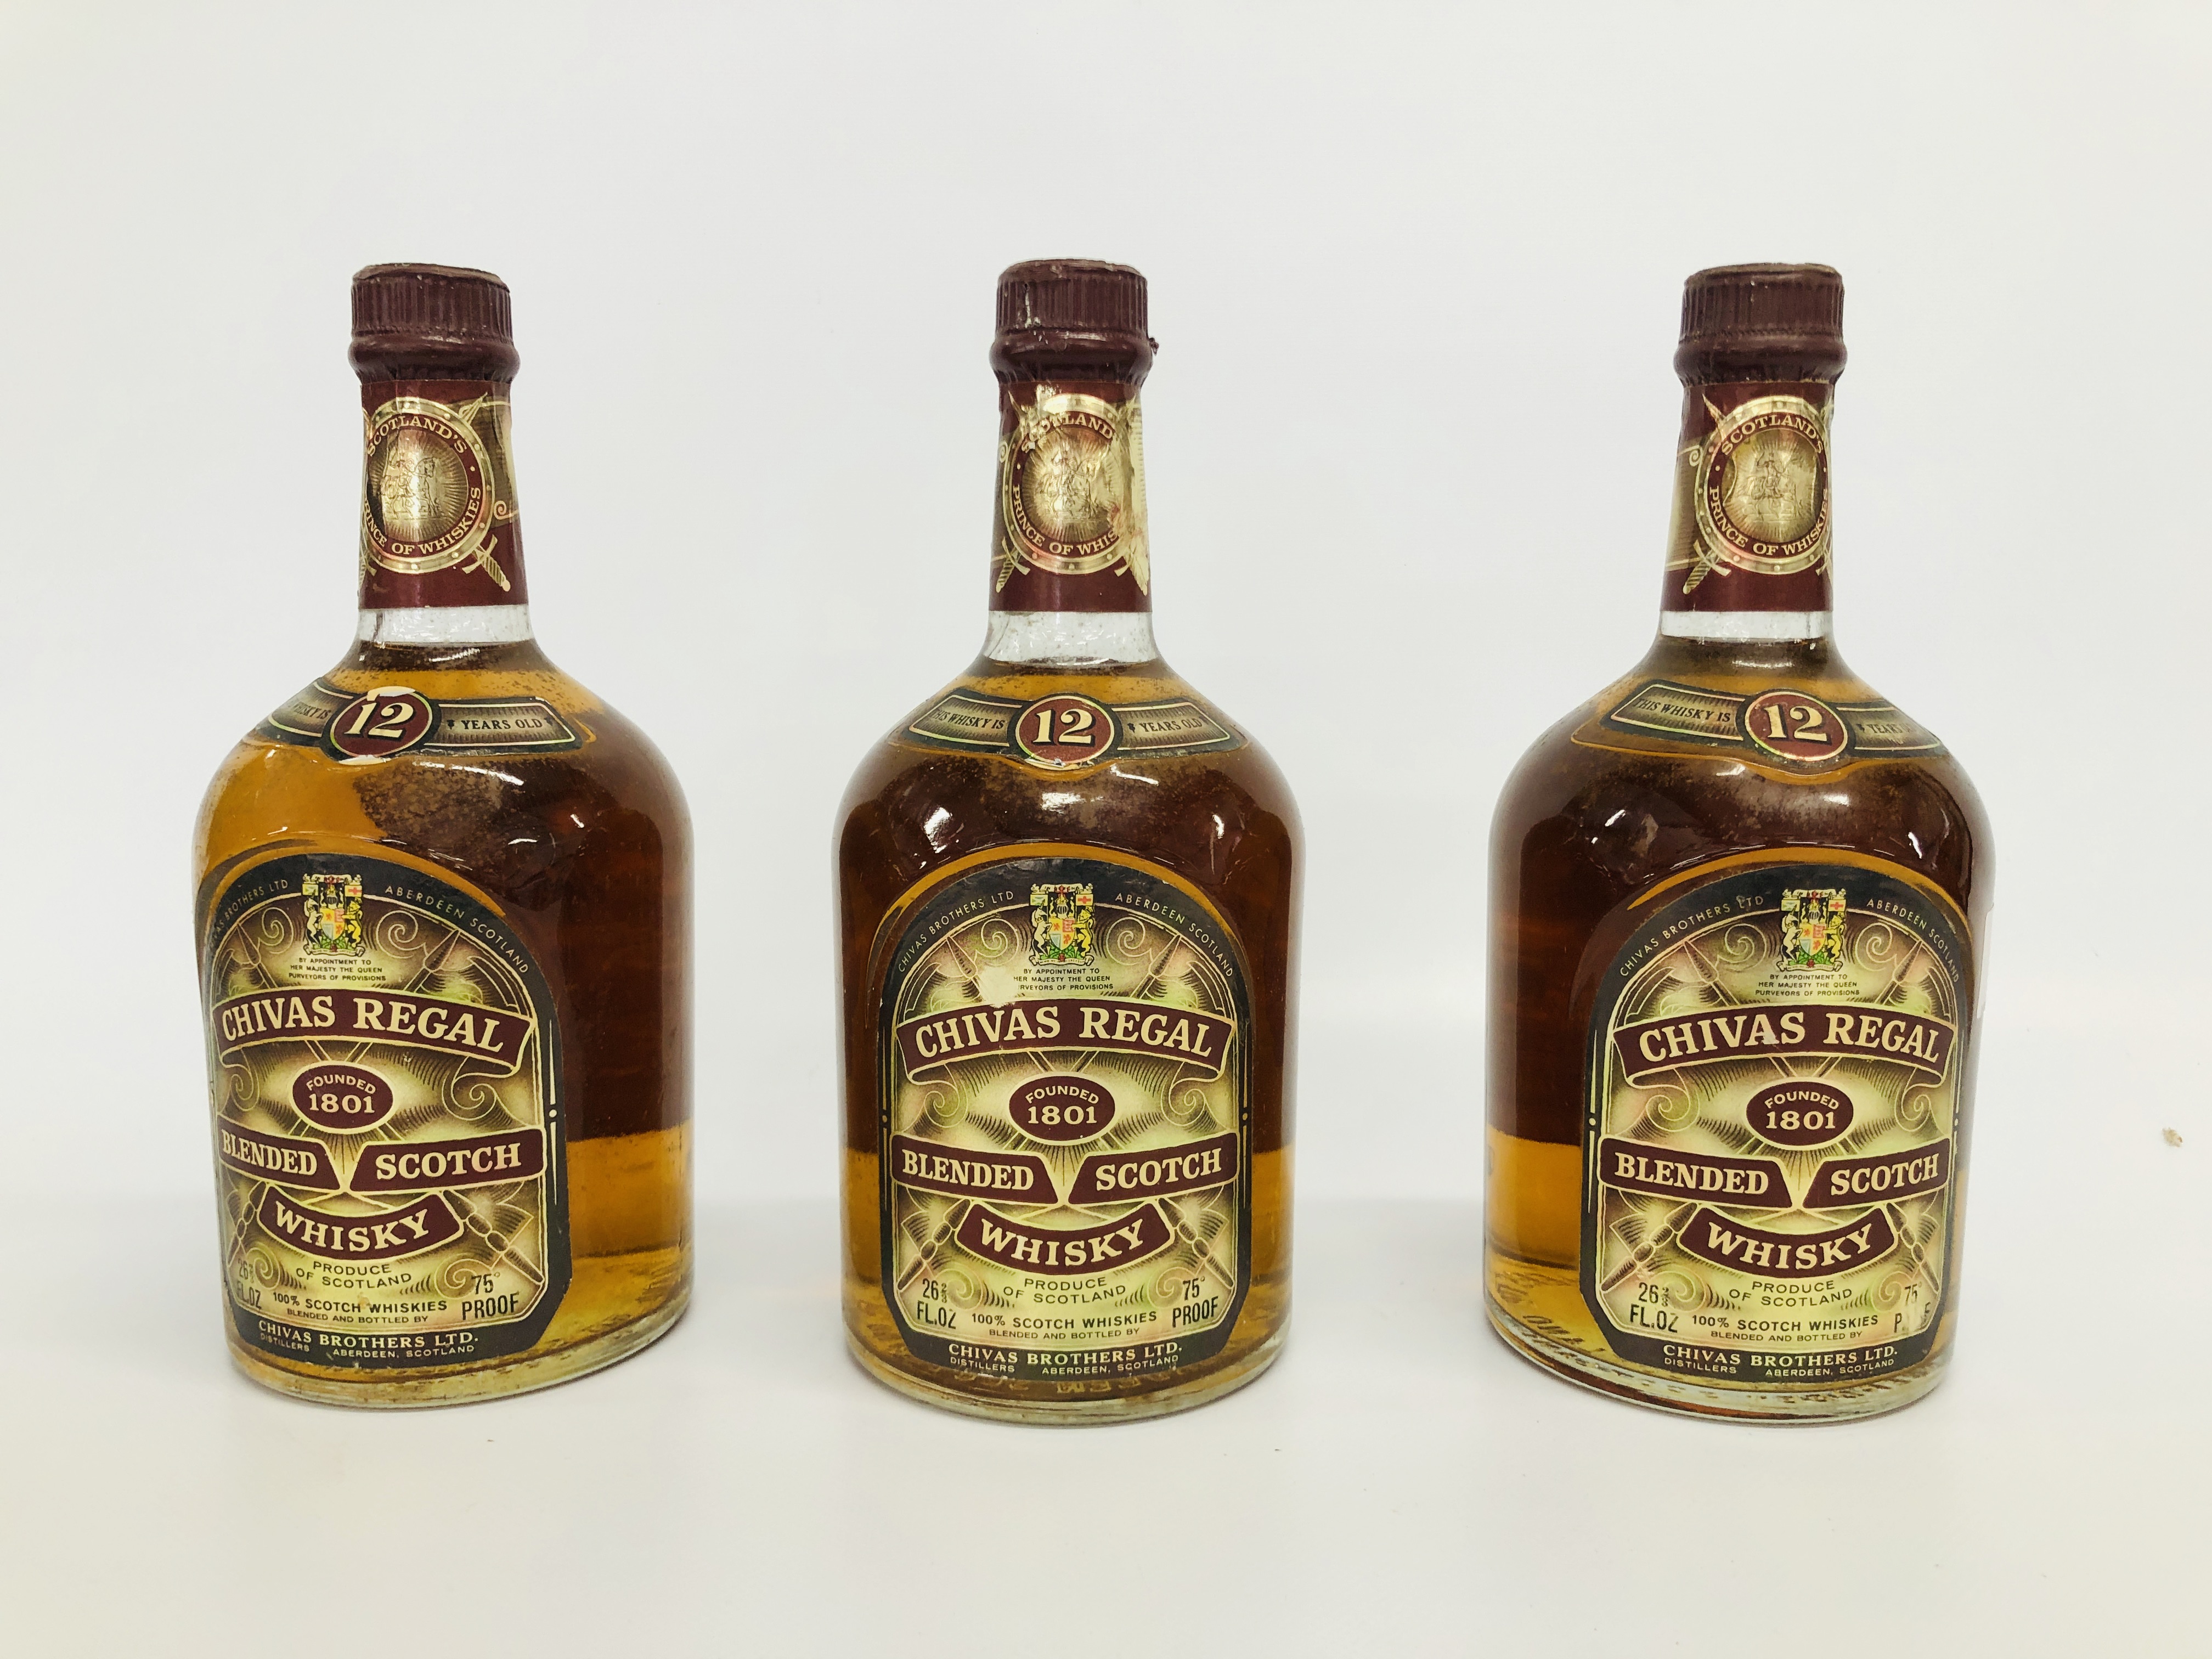 3 X CHIVAS REGAL 26 FL OZ 12 YEAR OLD BLENDED SCOTCH WHISKY (AS CLEARED)